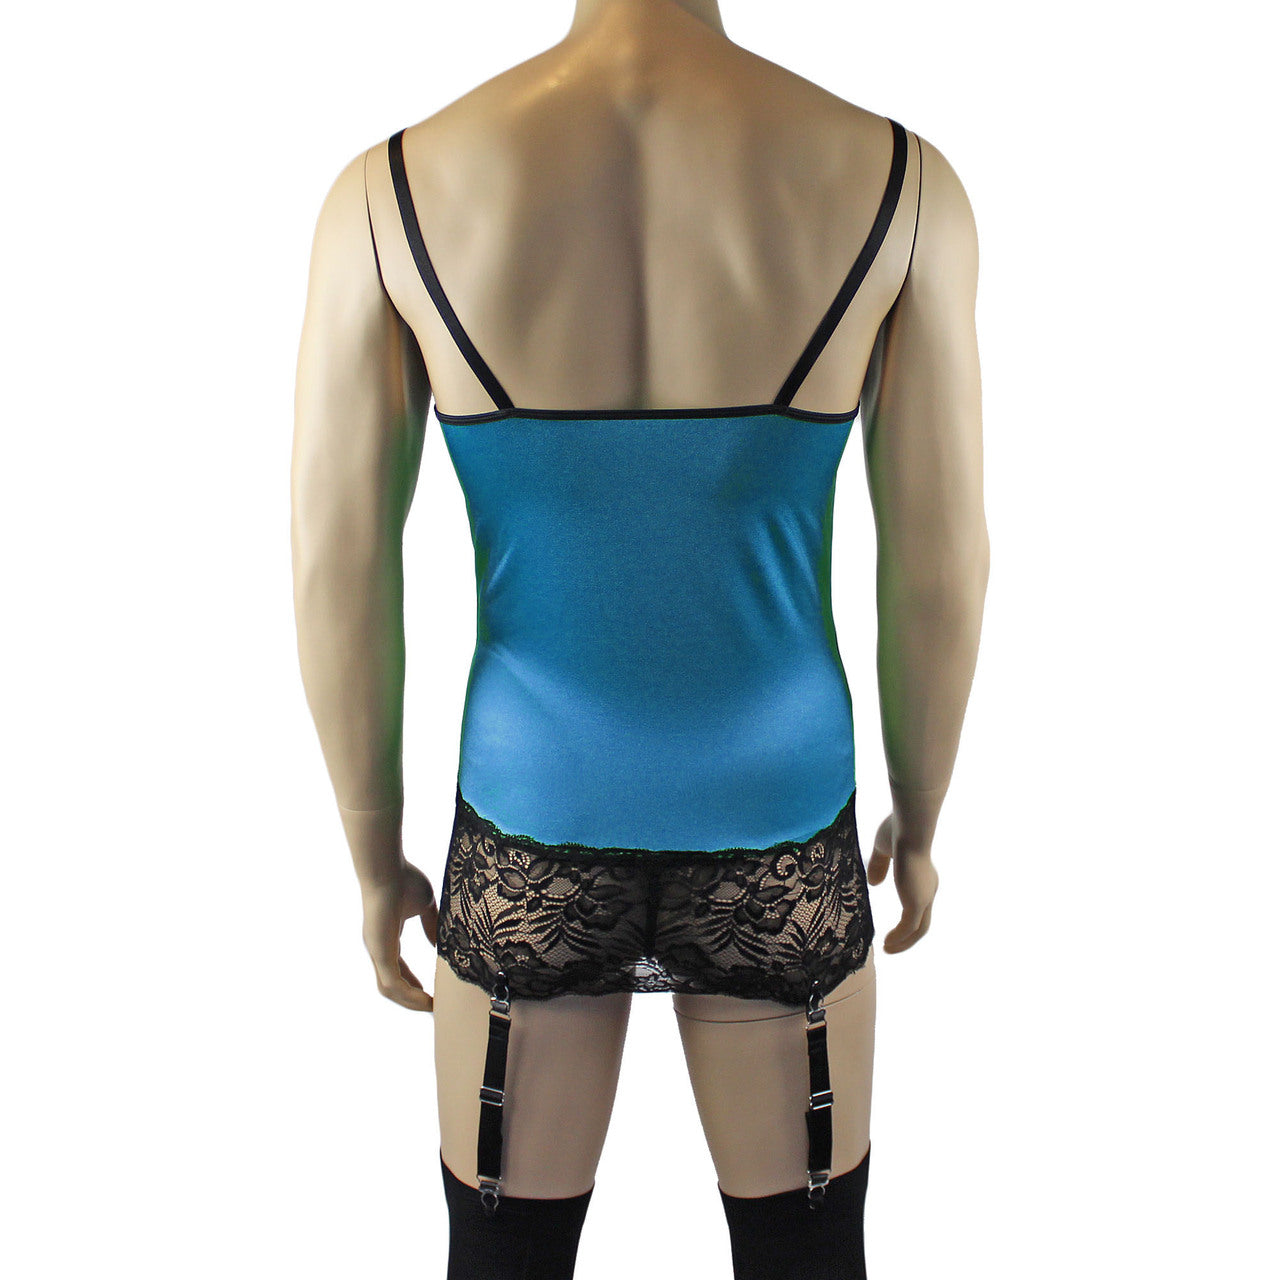 Mens Risque Camisole Mini Dress Chemise, G string & Stockings Teal and Black Lace